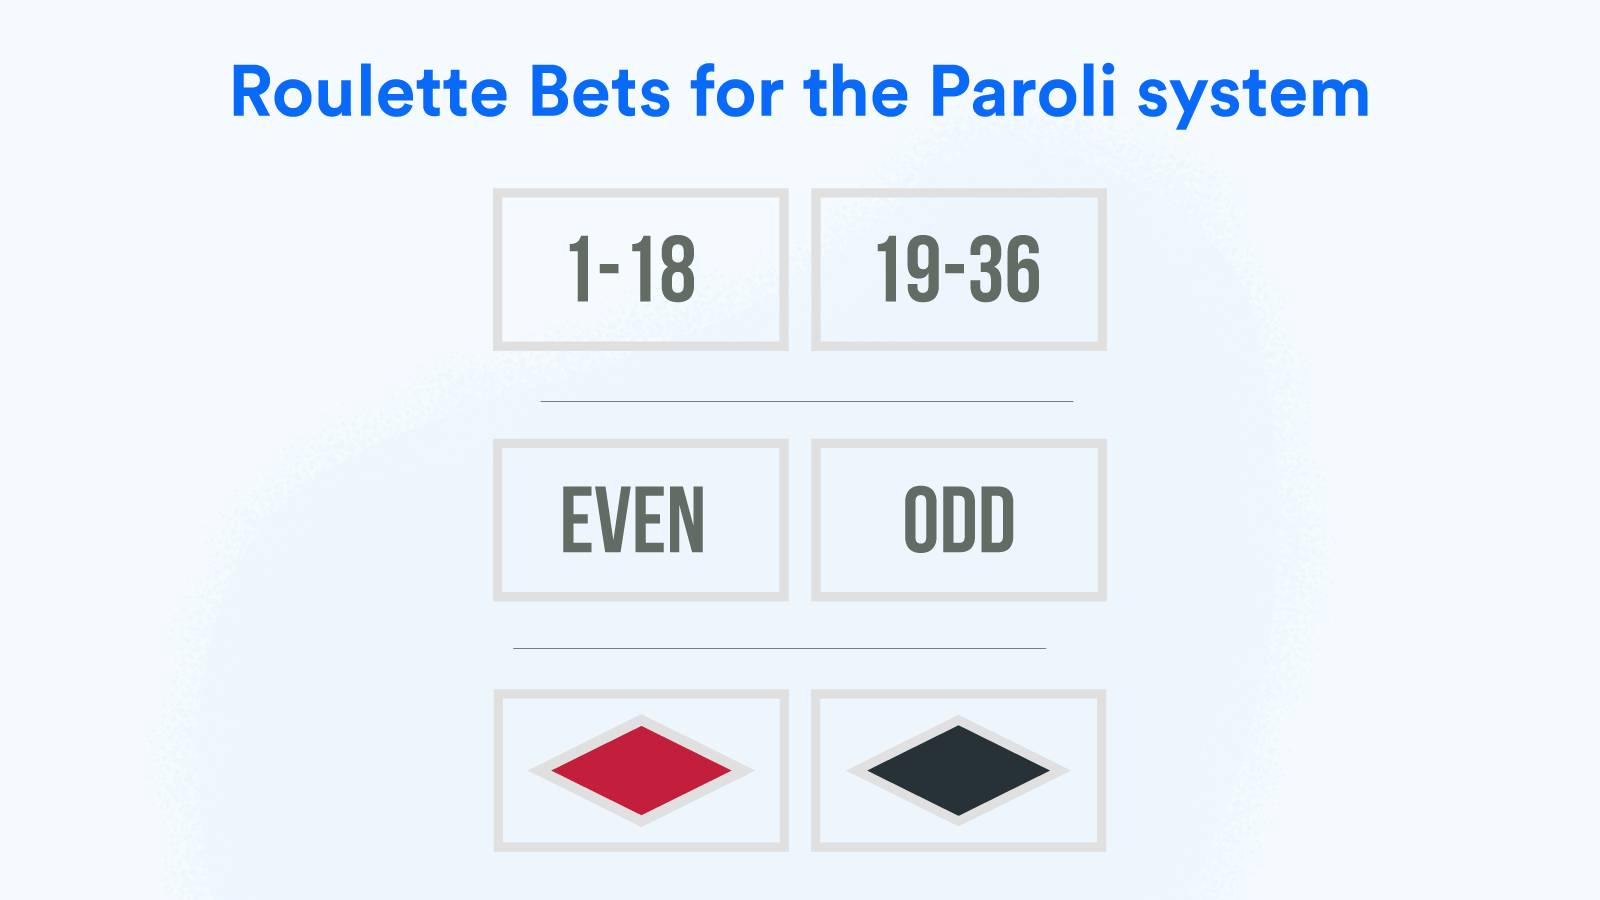 Roulette Bets for the Paroli system